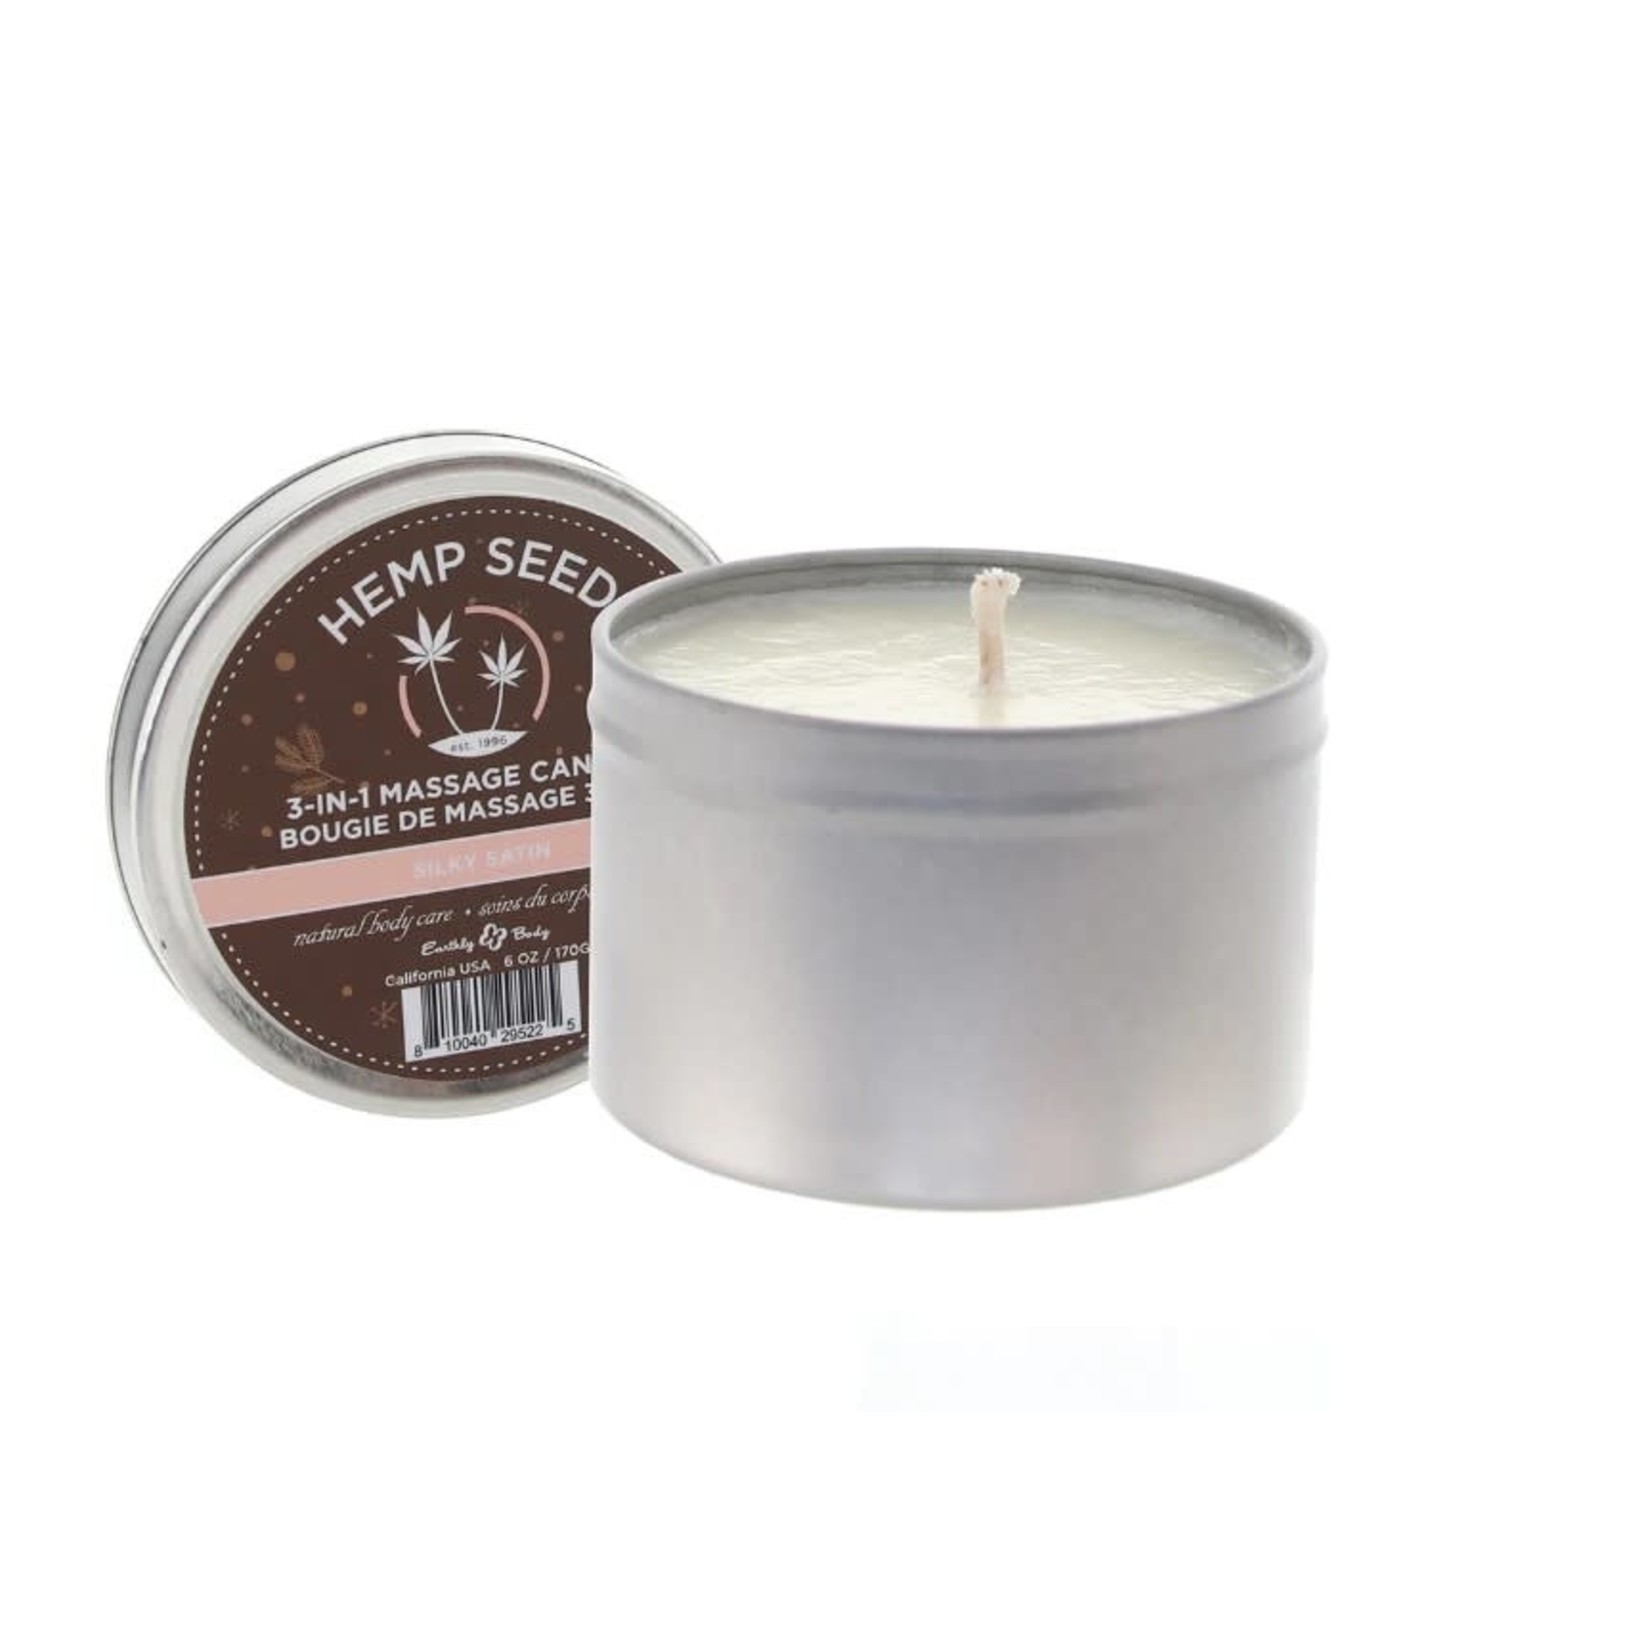 EARTHLY BODY EARTHLY BODY - 3-IN-1 MASSAGE CANDLE 6OZ/170G SILKY SATIN